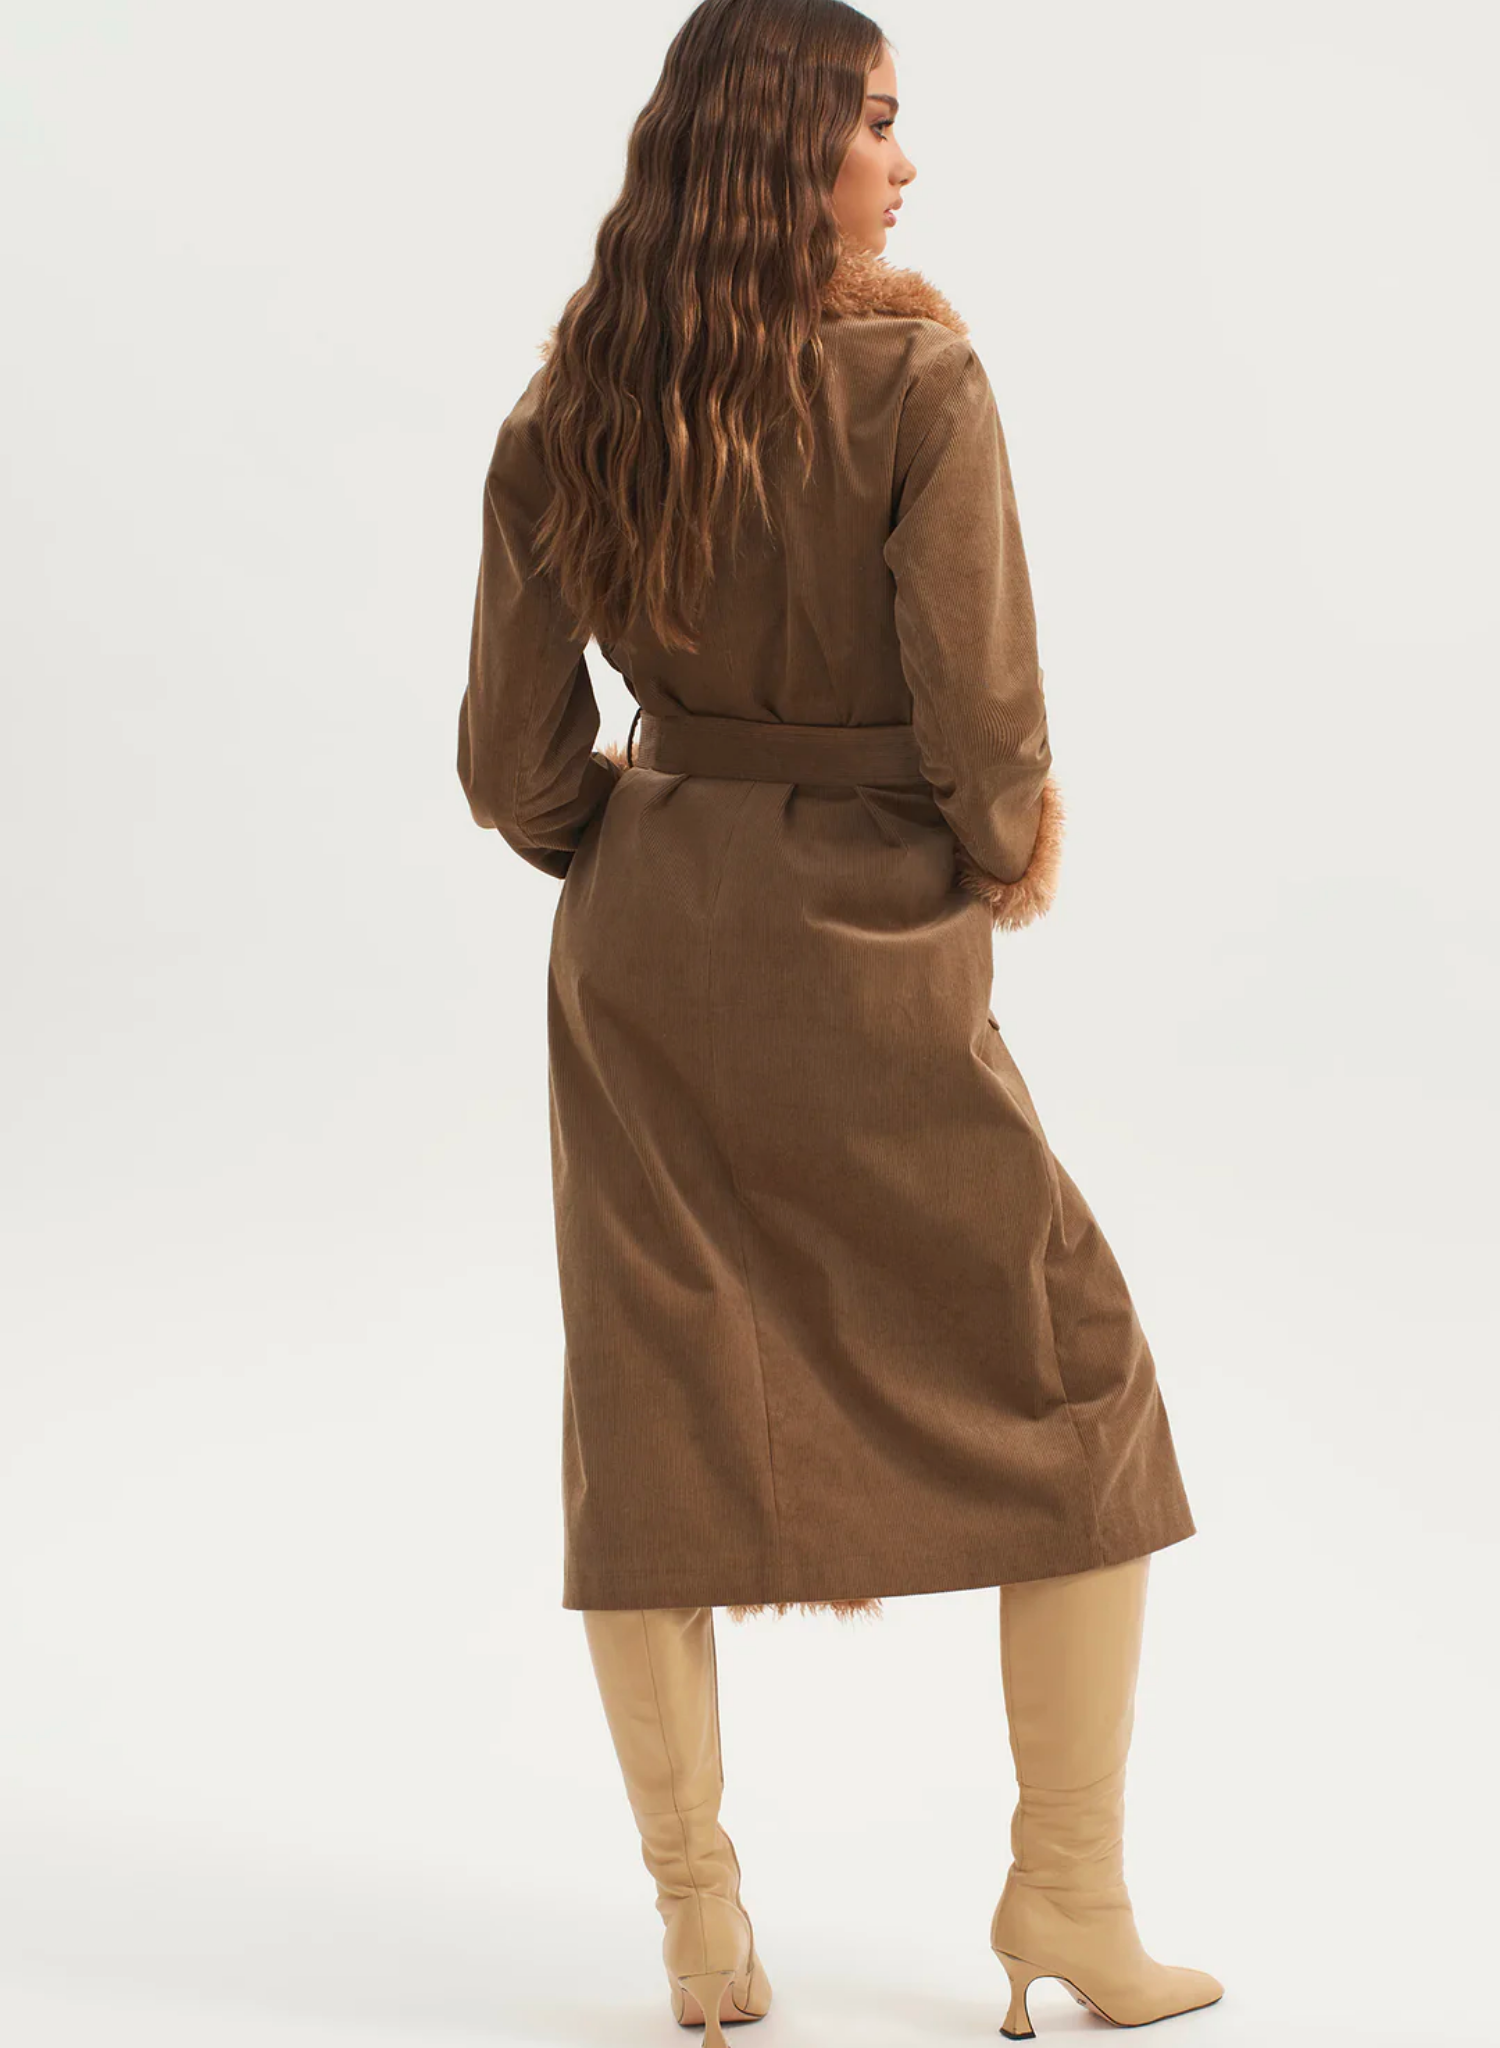 The Heaven Coat is our statement fur trim penny lane coat. The long-line fit is complimented by a fur collar and cuffs. The jacket can be cinched in at the waist with the matching belt or worn open over your favourite dress. Pair with your favourite boots and you are ready for this winter season.